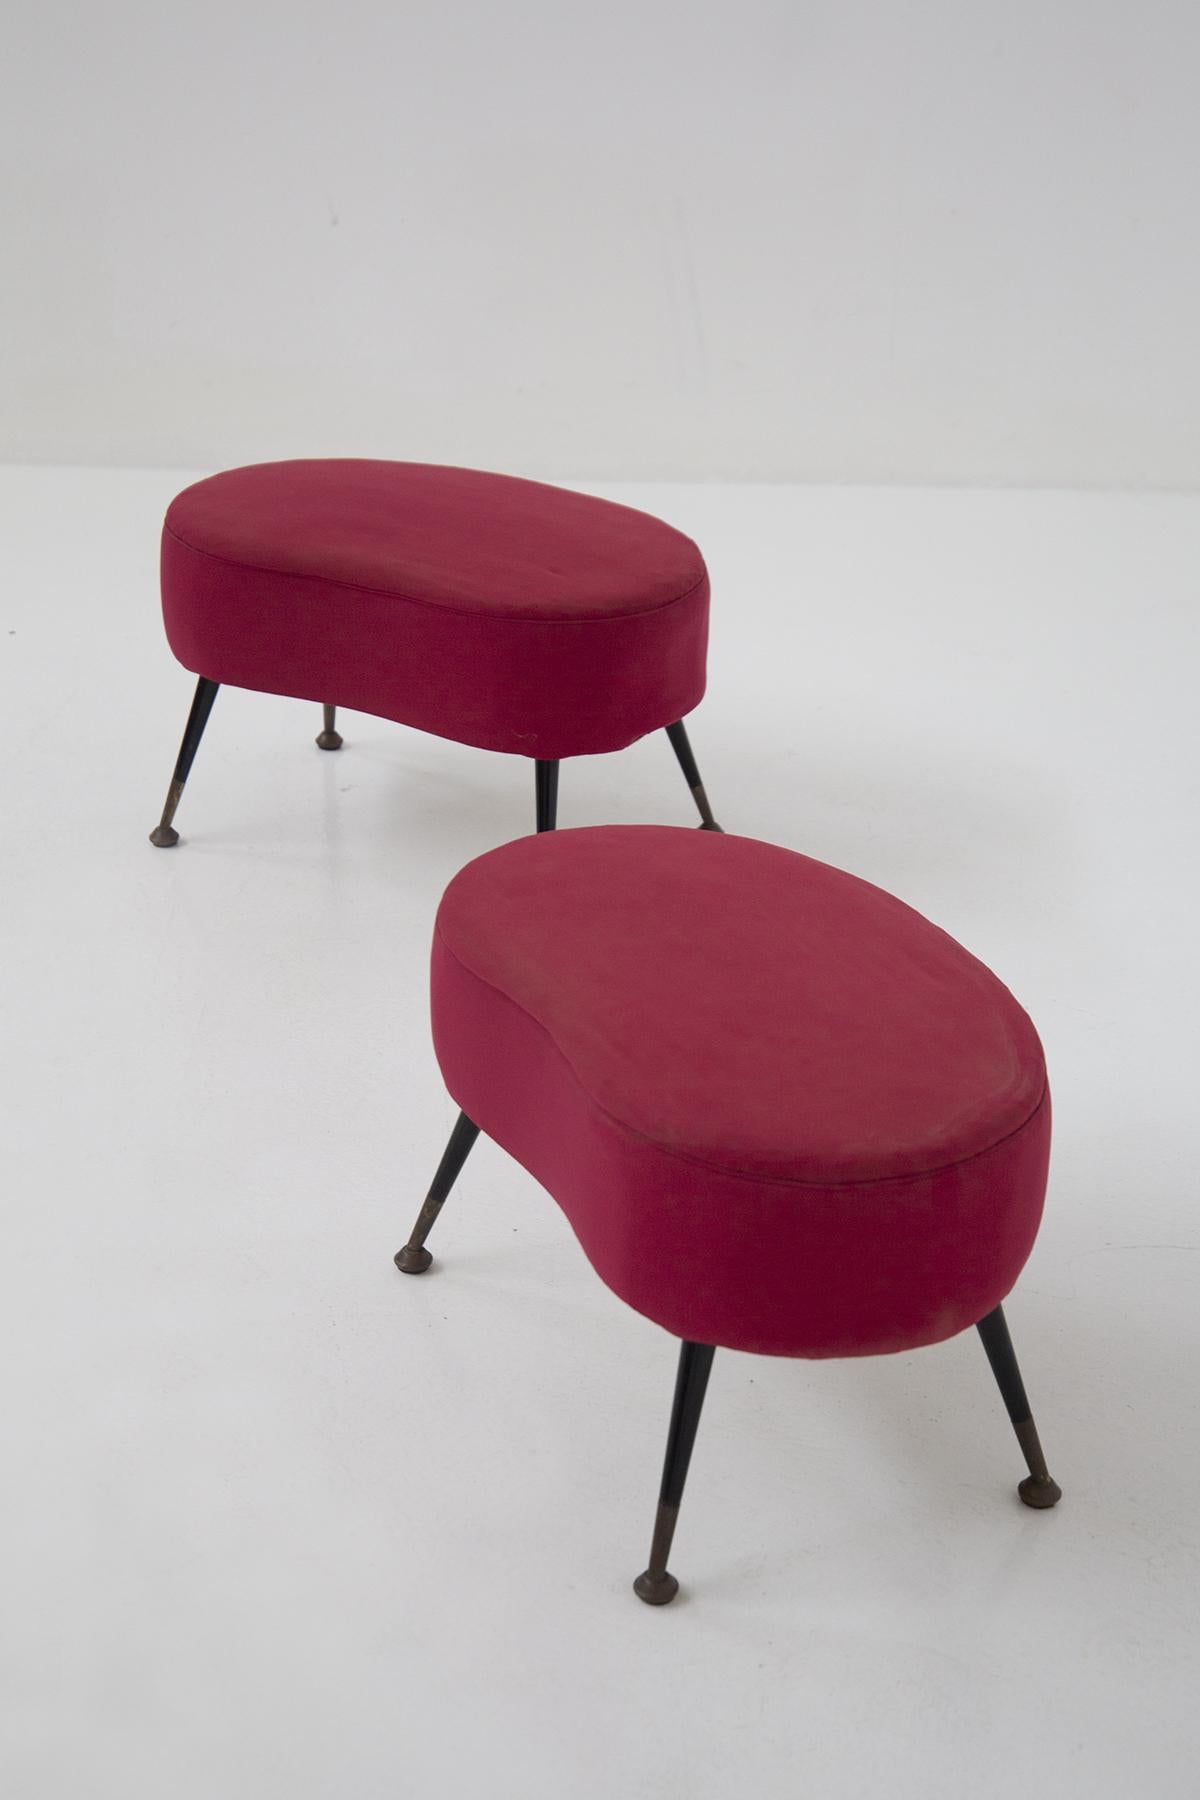 Gorgeous pair of velvet poufs designed in the 1950s by fine Italian manufacture.
The pouffs have a frame made of black aluminum, with round brass feet in patina.
There are 4 legs and they are slightly flared to allow for stability.
The seat, on